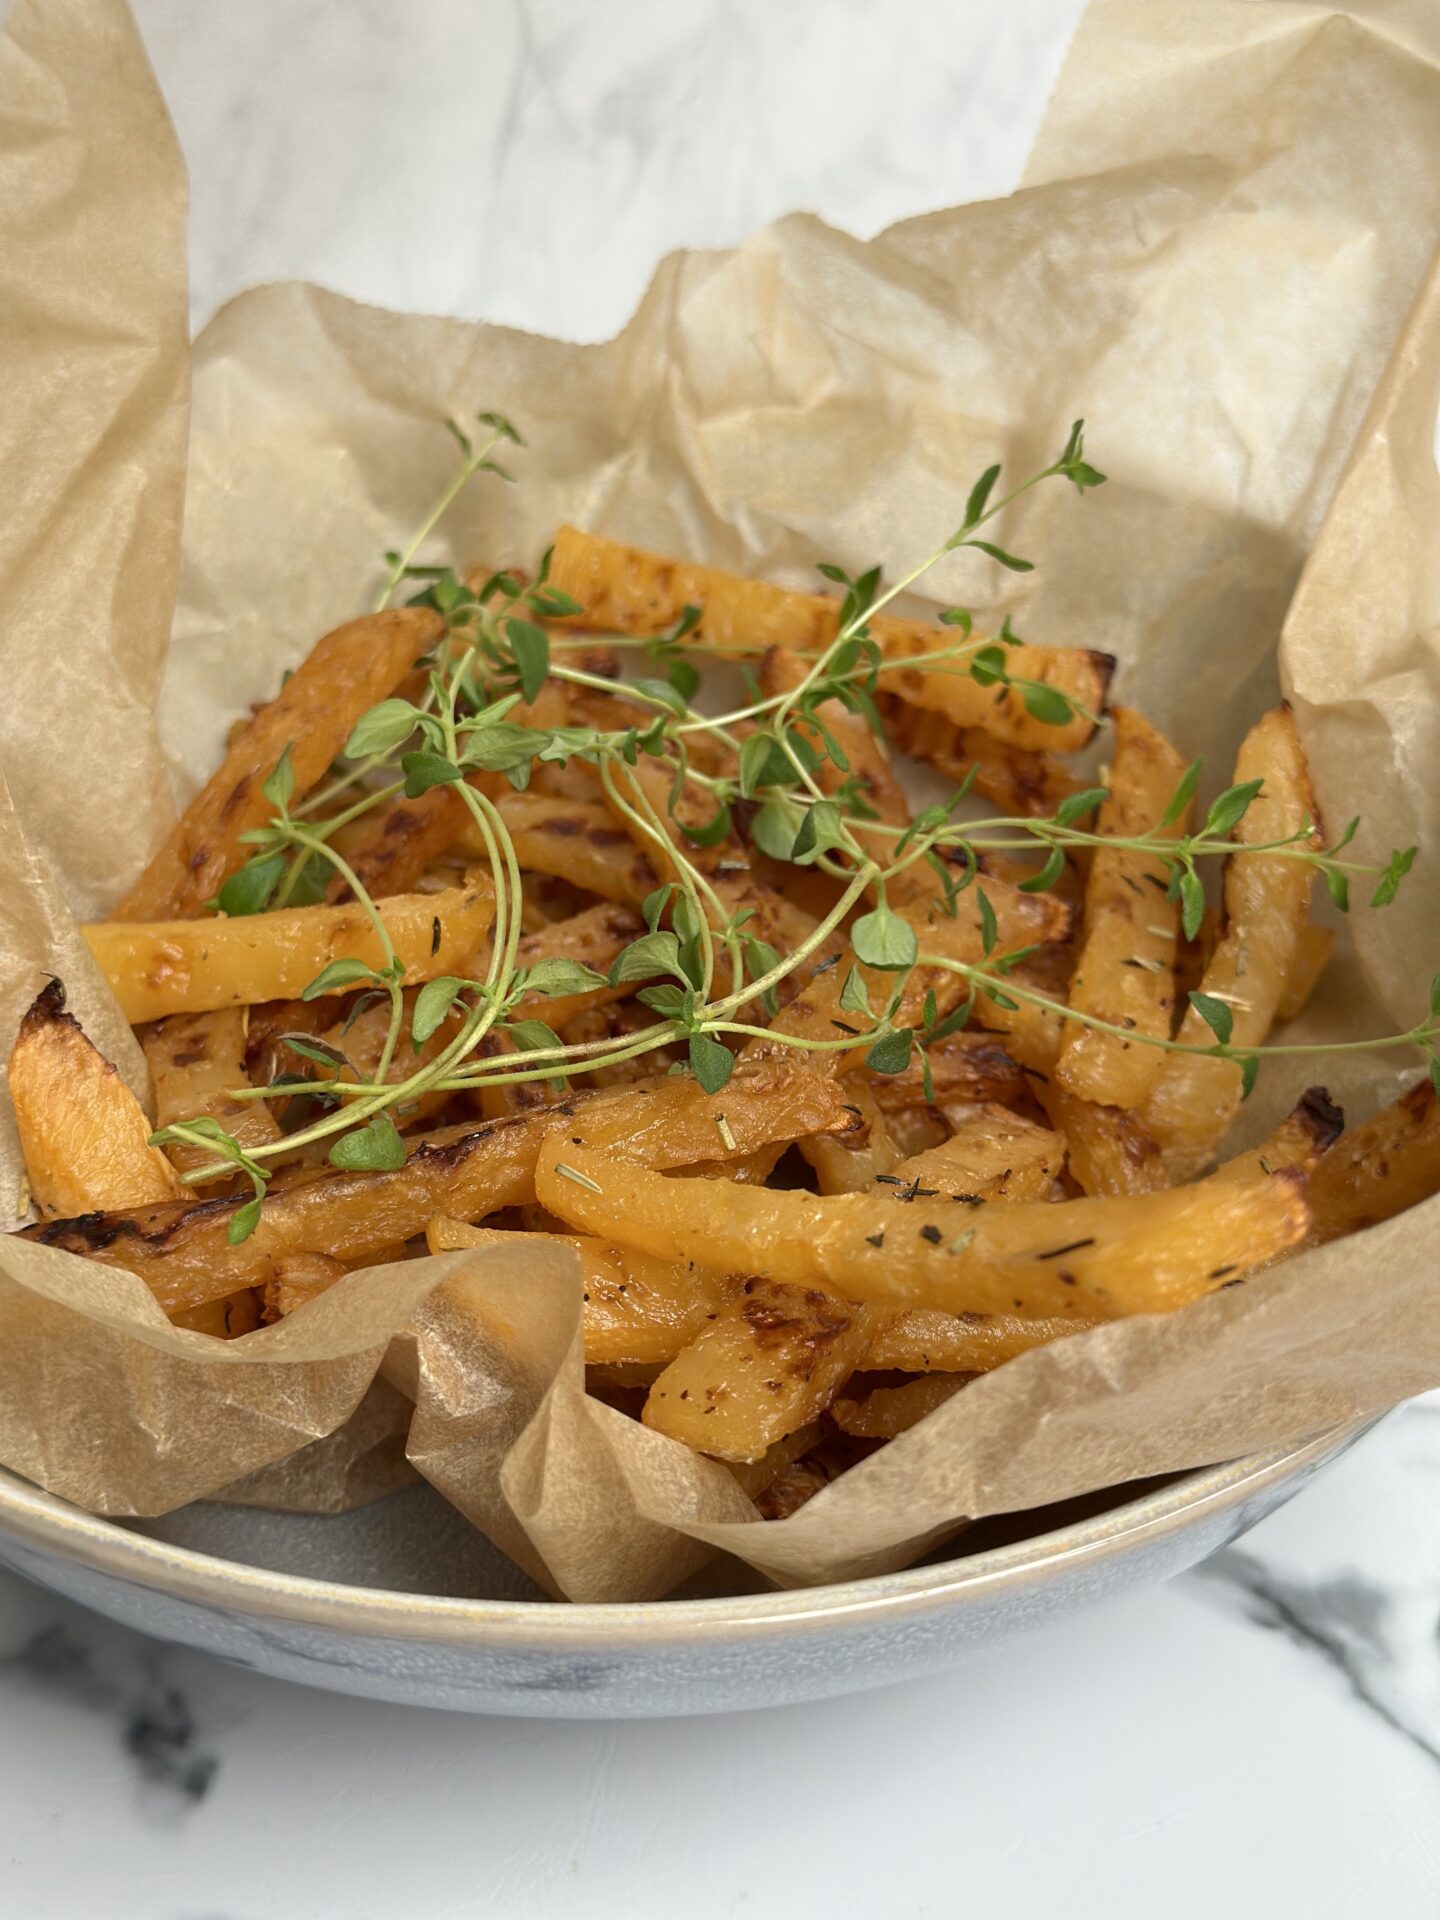 A brown paper lined bowl of golden oven roasted rutabaga fries sits on a white marble counter top